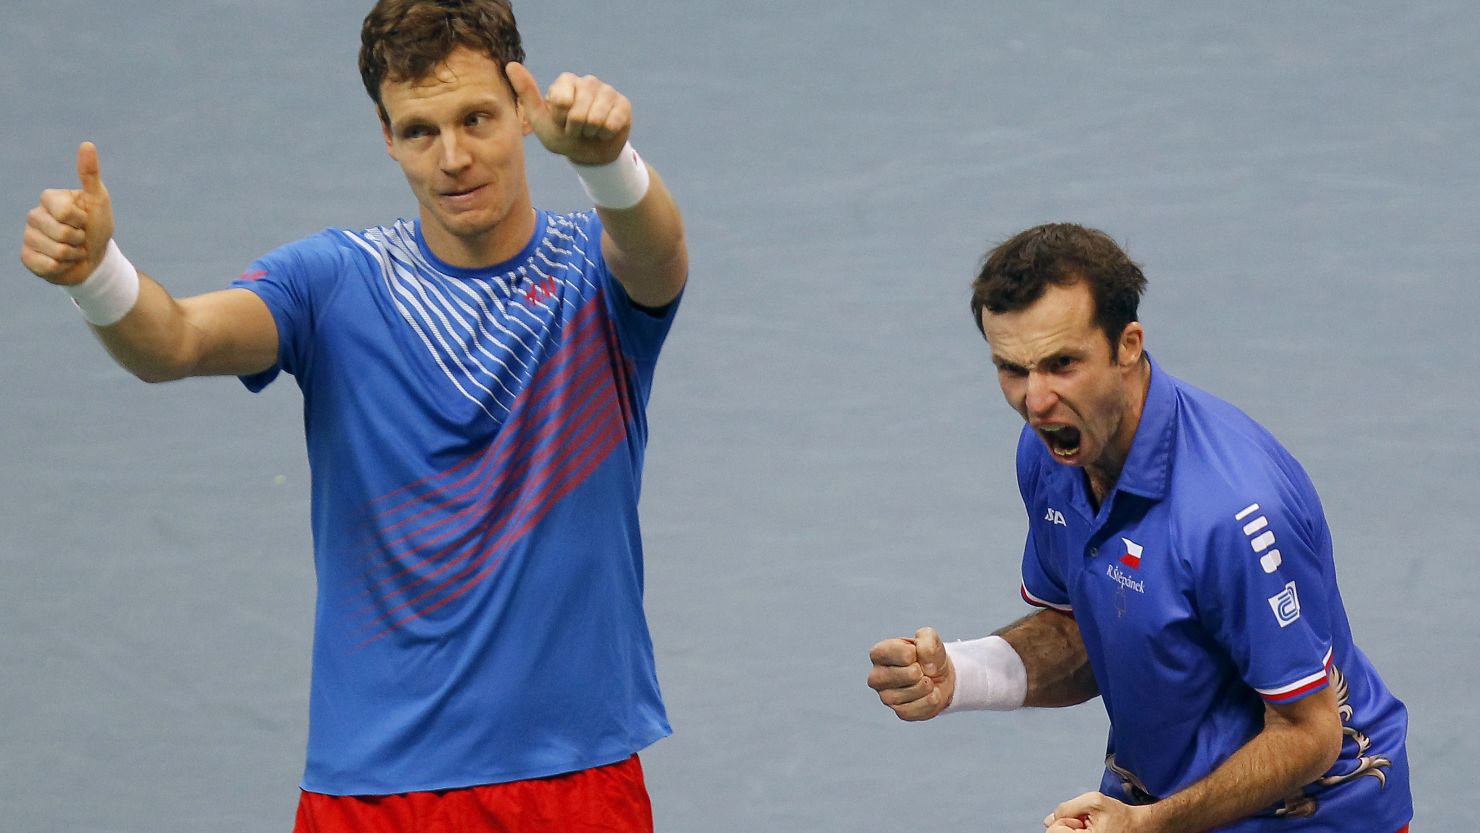 Tomas Berdych and Radek Stepanek celebrate their crucial victory in the doubles in the Davis Cup final to give the Czech Republic a 2-1 lead.  